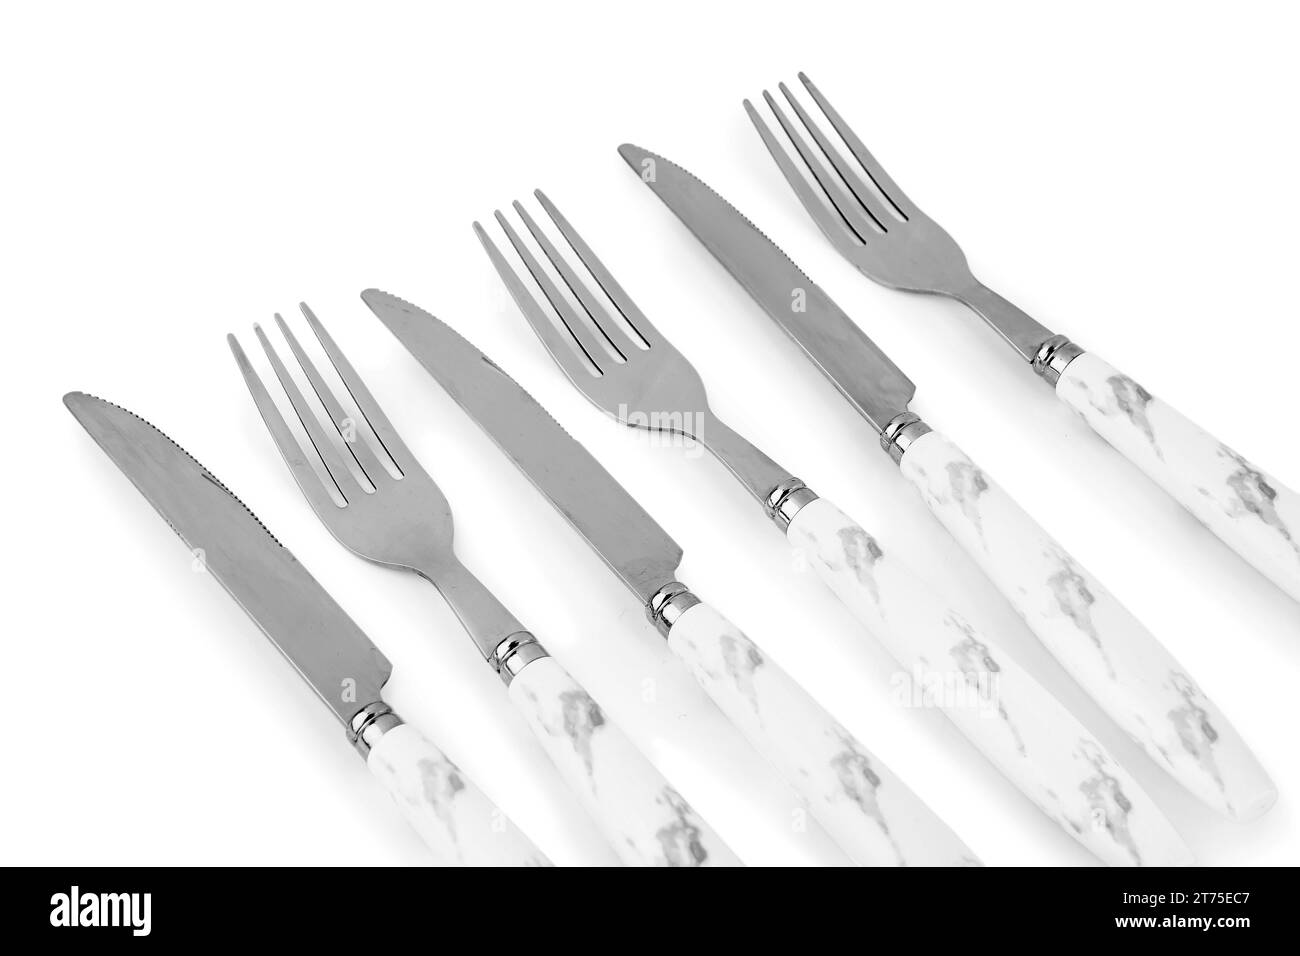 Stainless steel forks and knives with plastic handles on white background Stock Photo